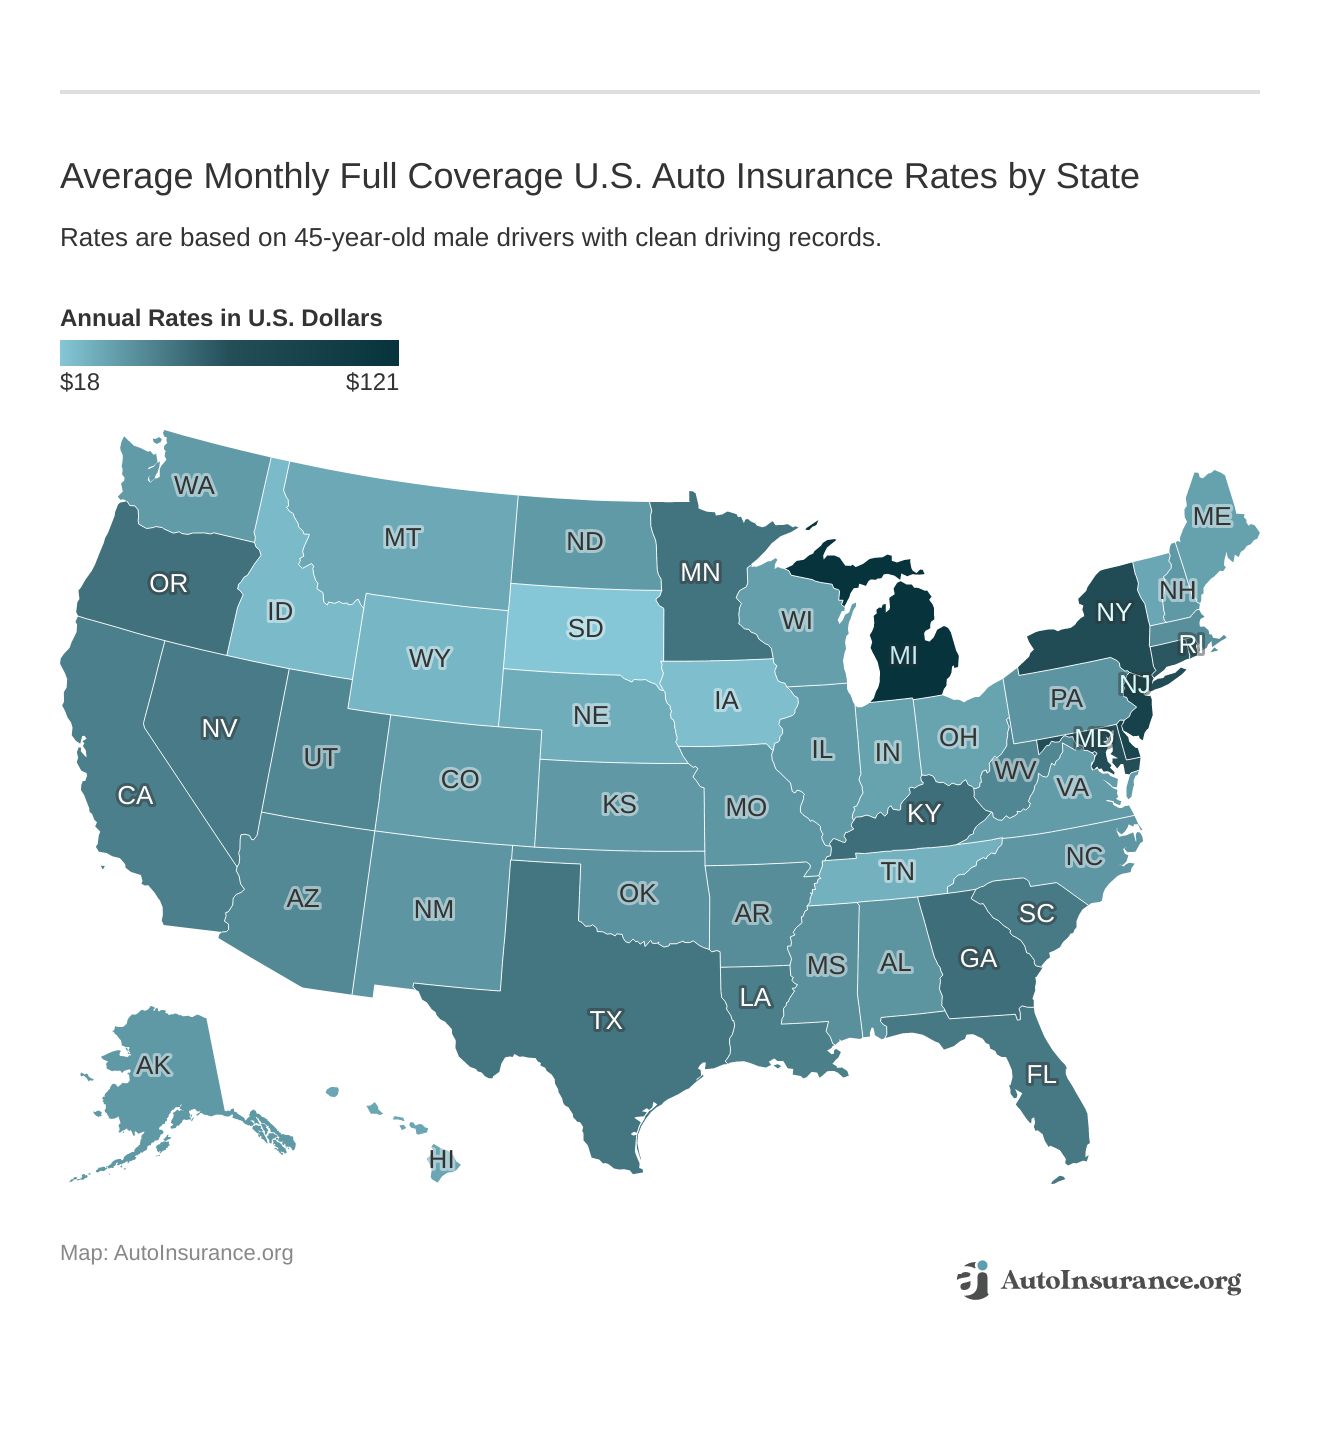 <h3>Average Monthly Full Coverage U.S. Auto Insurance Rates by State</h3>